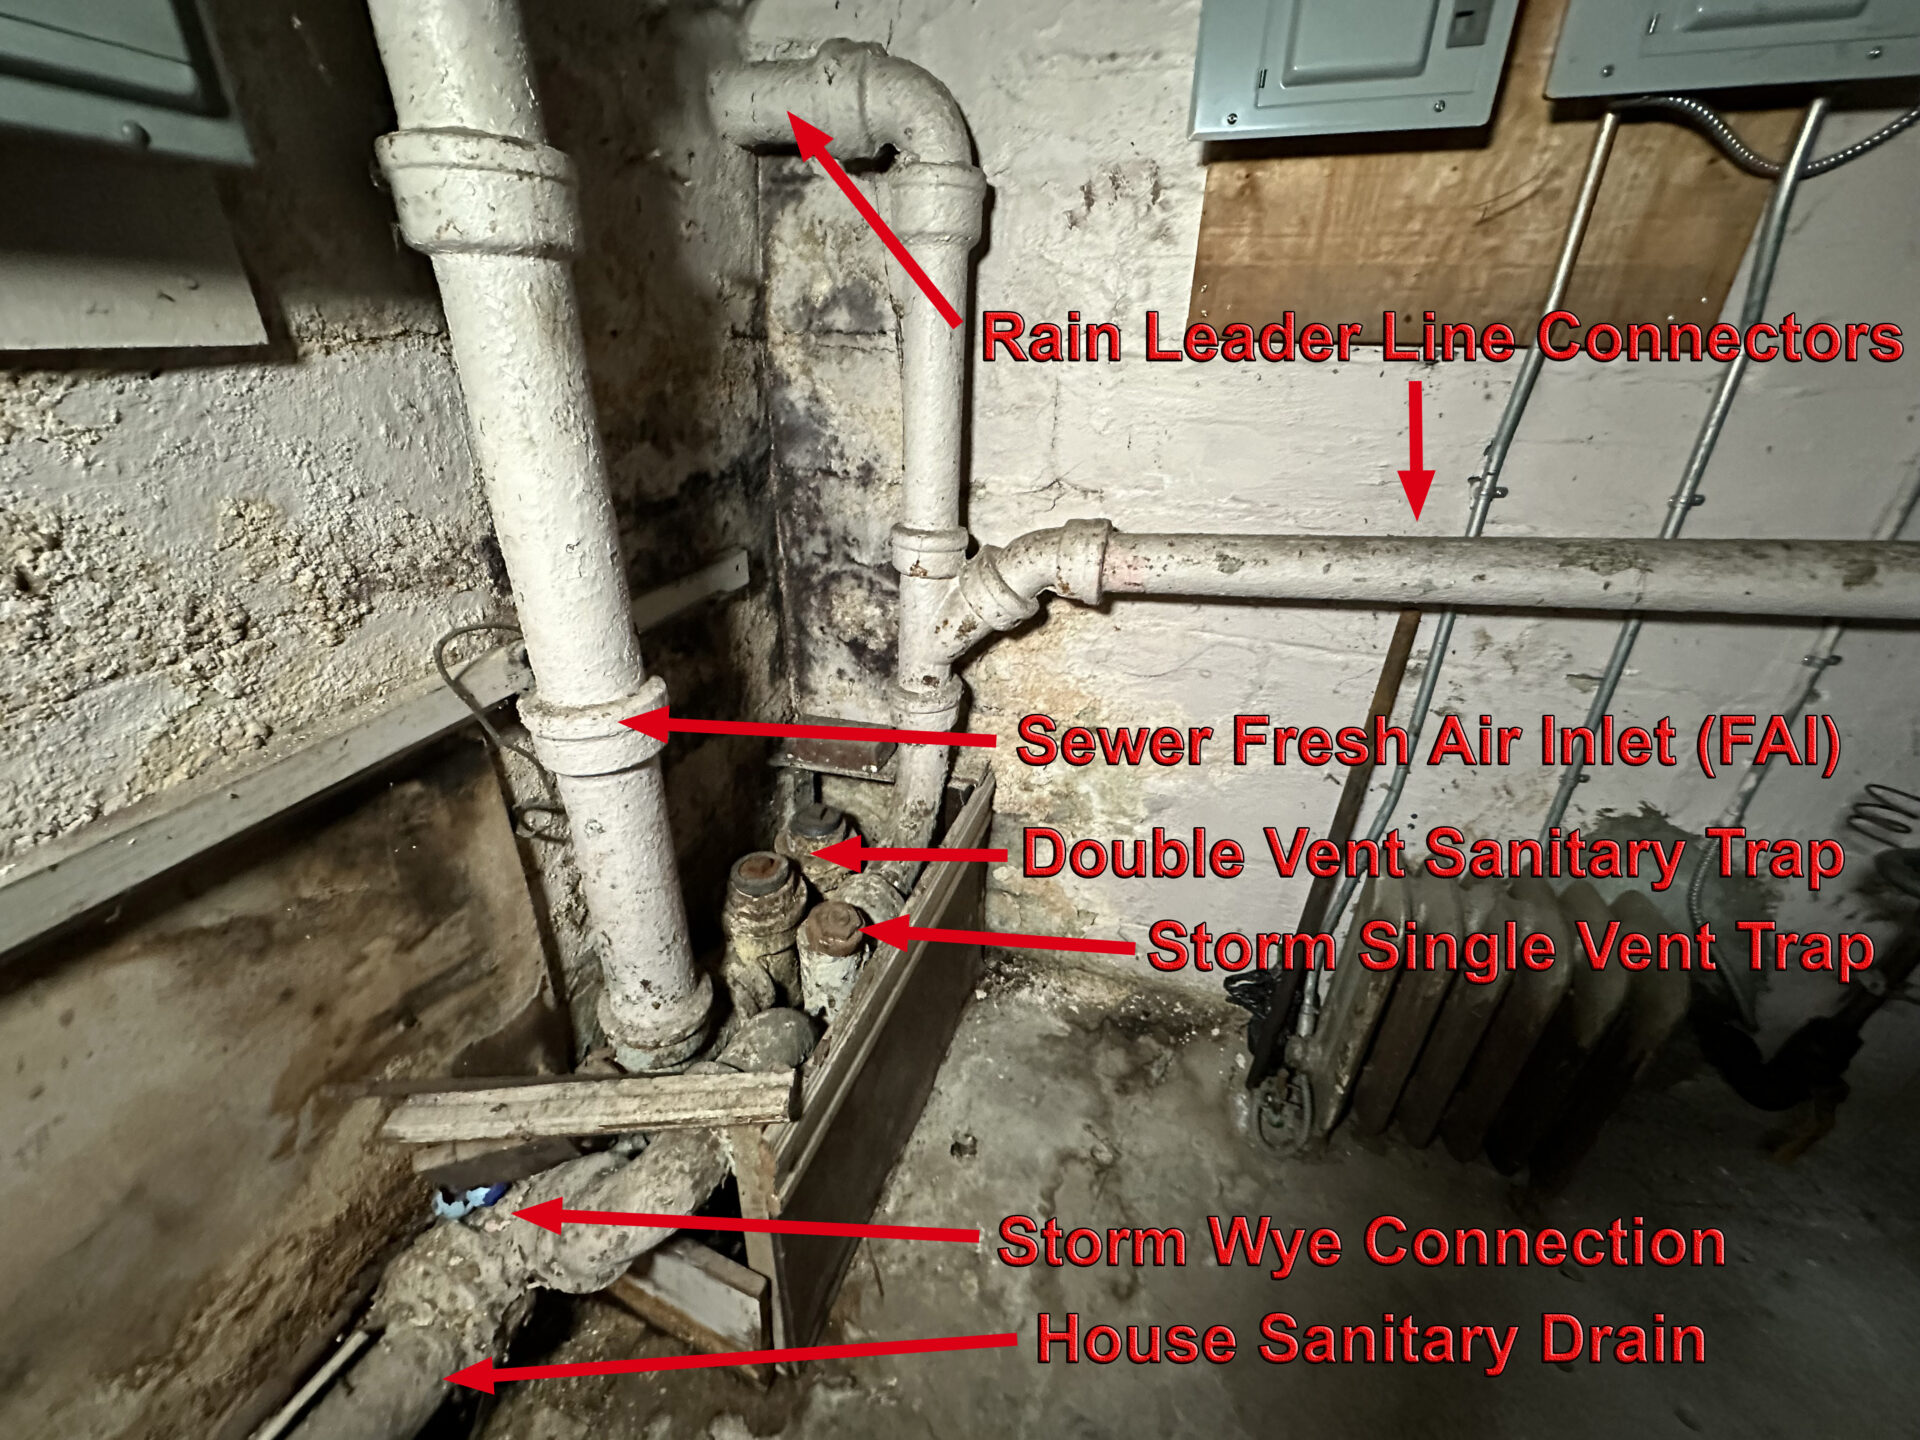 House drain traps and house drain plumbing inside a basement.